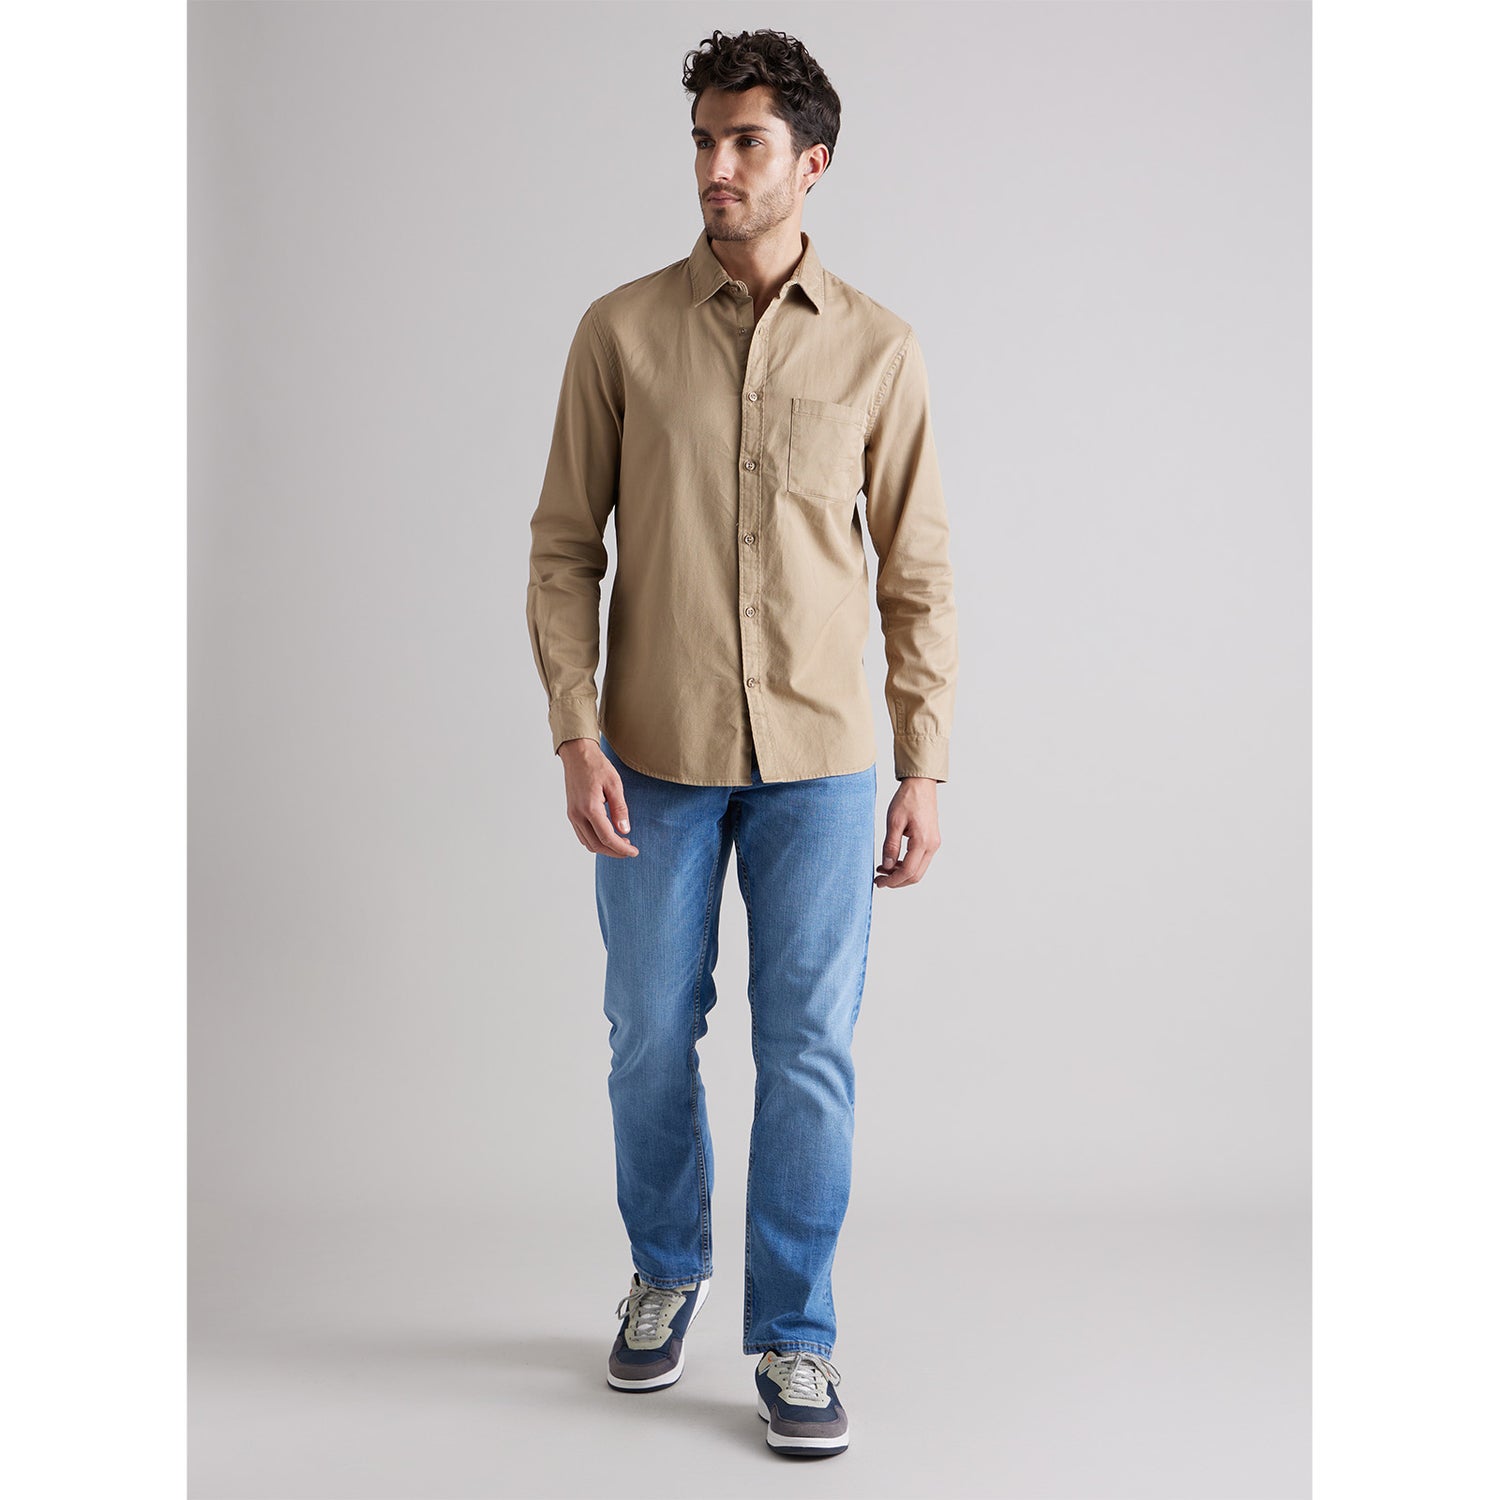 Beige Spread Collar Cotton Casual Shirt (CAODYED)